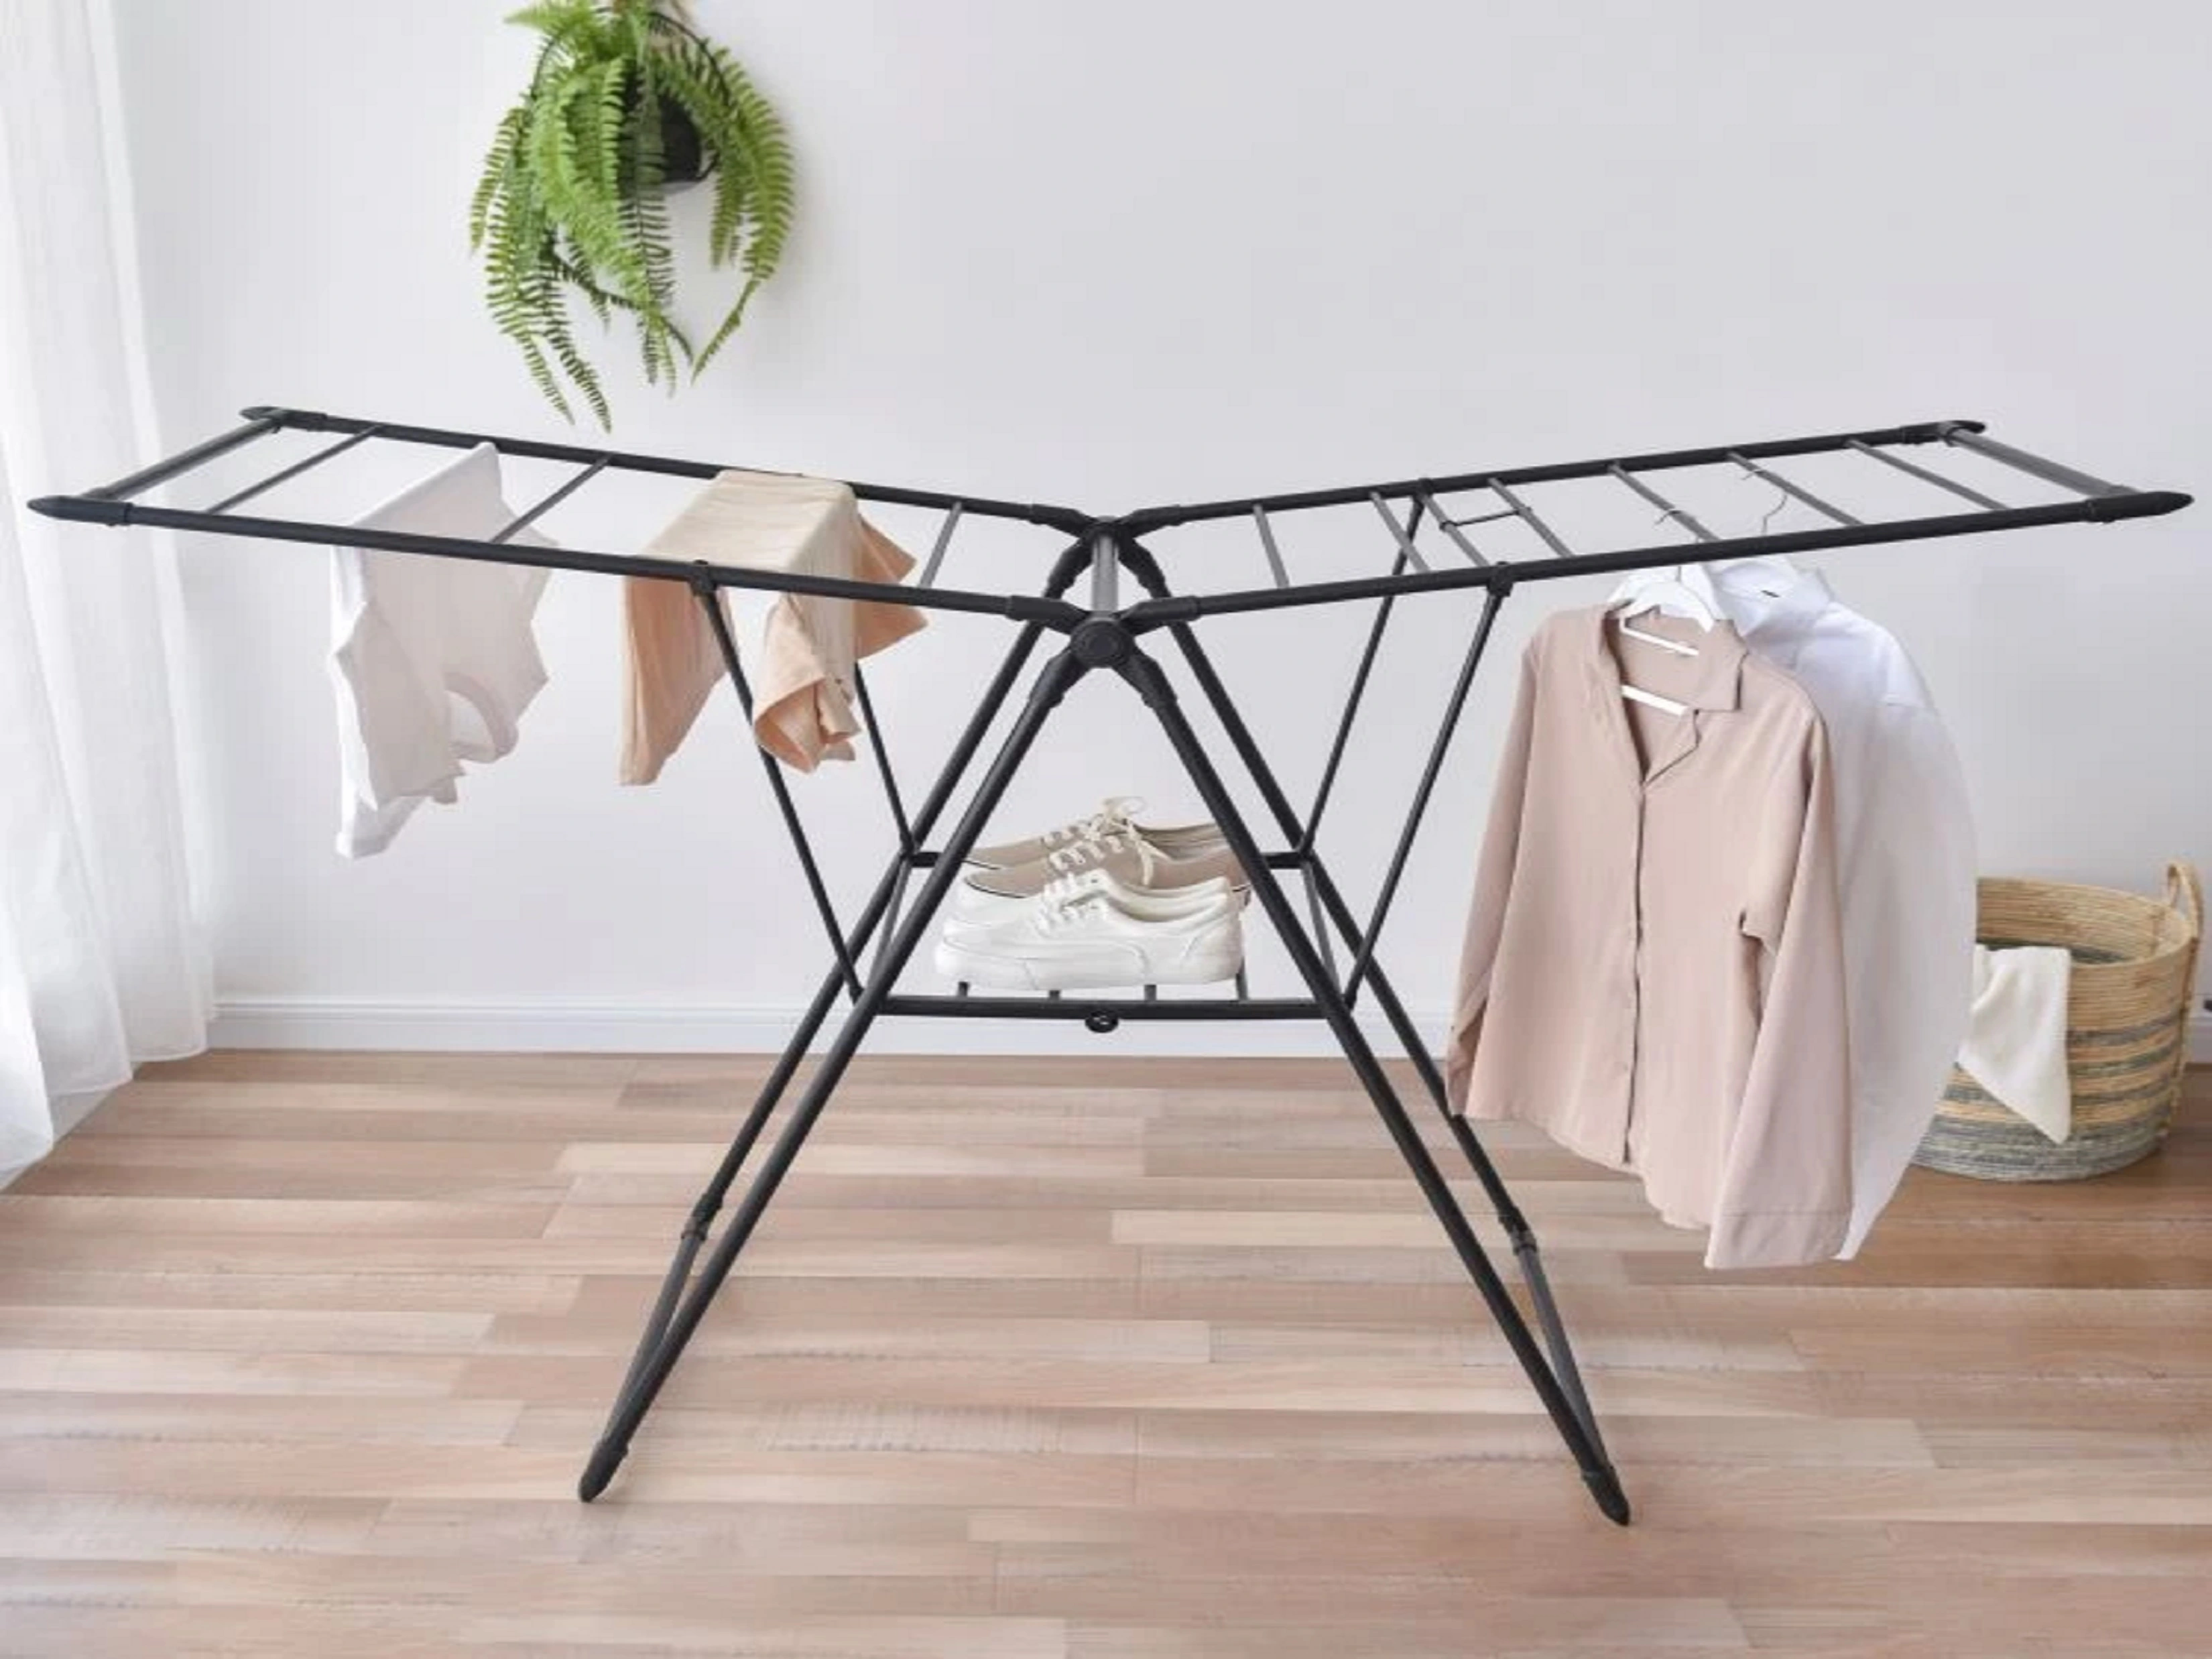 The Difference Between Winged Clothers Airer and Foldable X-Type Clothes Airer: Which Is Better